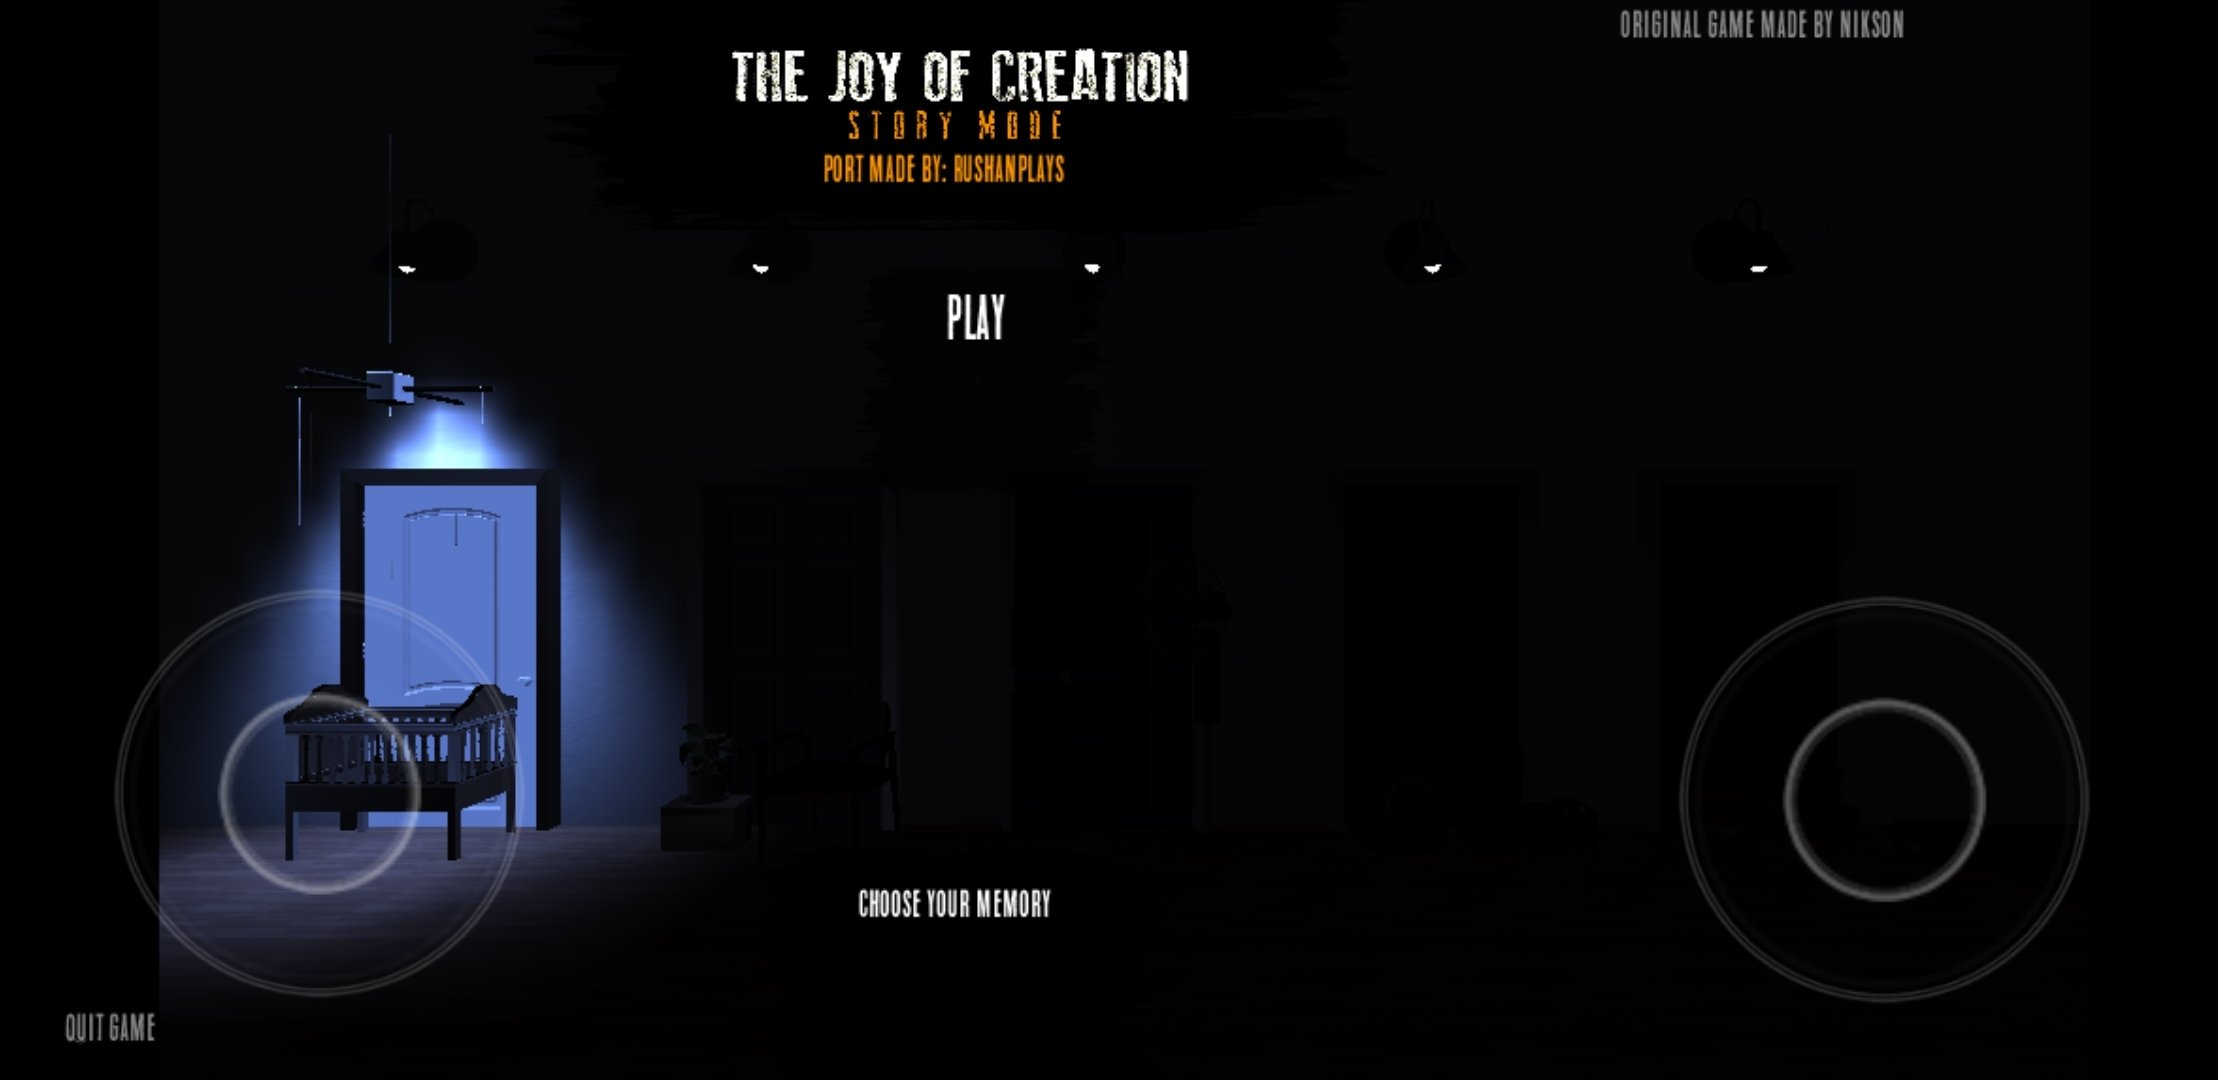 the joy of creation story mode para android (fan made) apk 